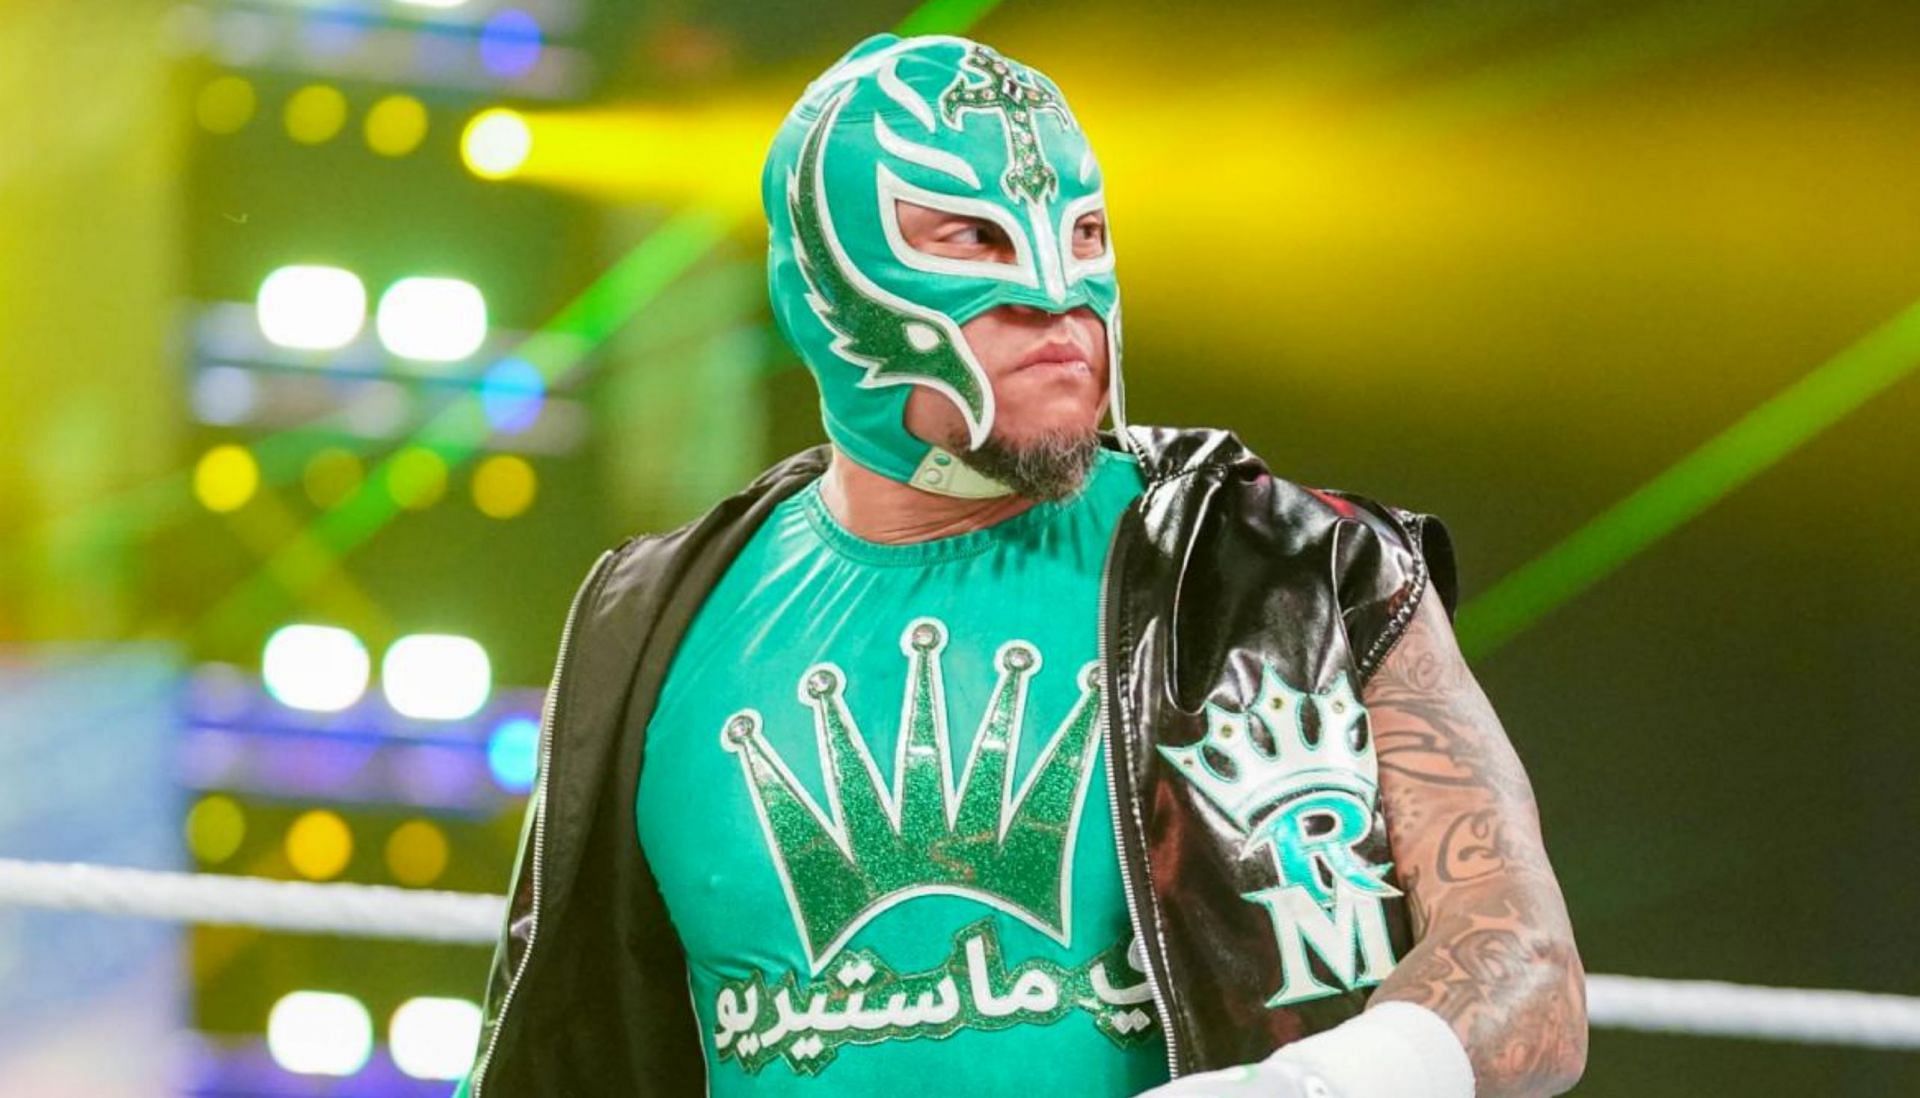 Rey Mysterio and Dominik will face The Miz and Logan Paul at WrestleMania